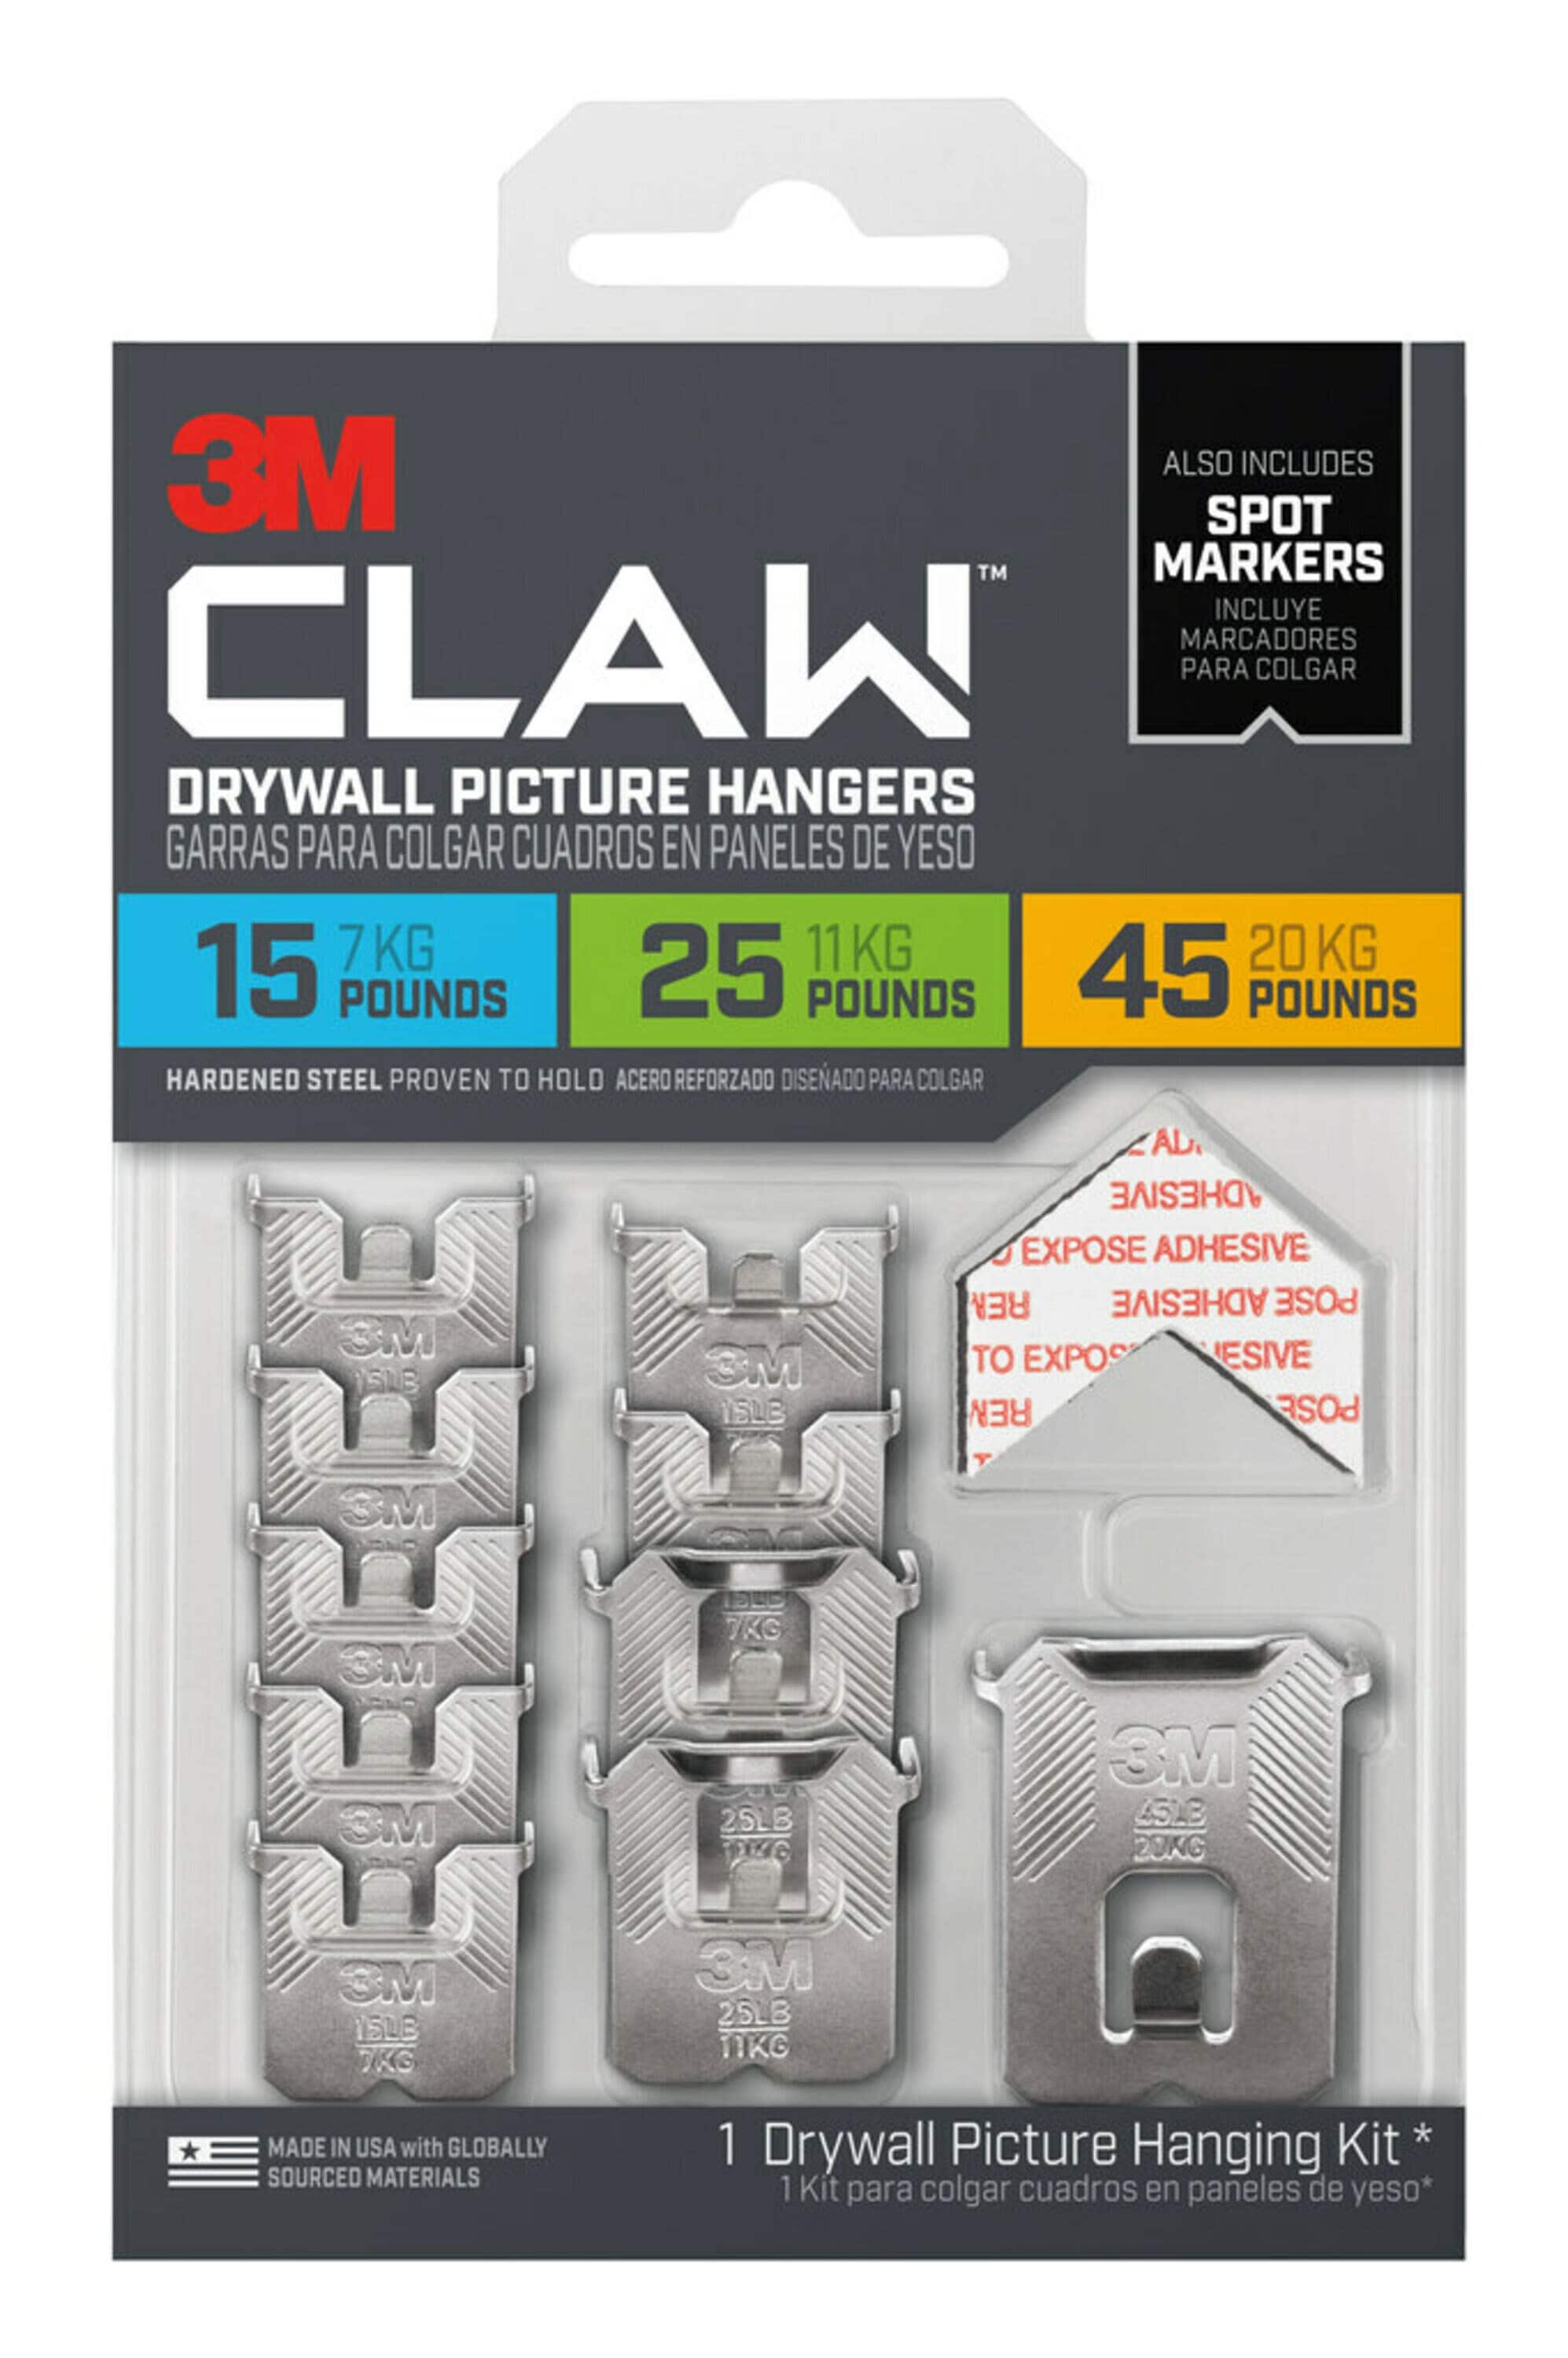 3M CLAW Drywall Picture Hangers 4-Pack Stainless Steel Hanging